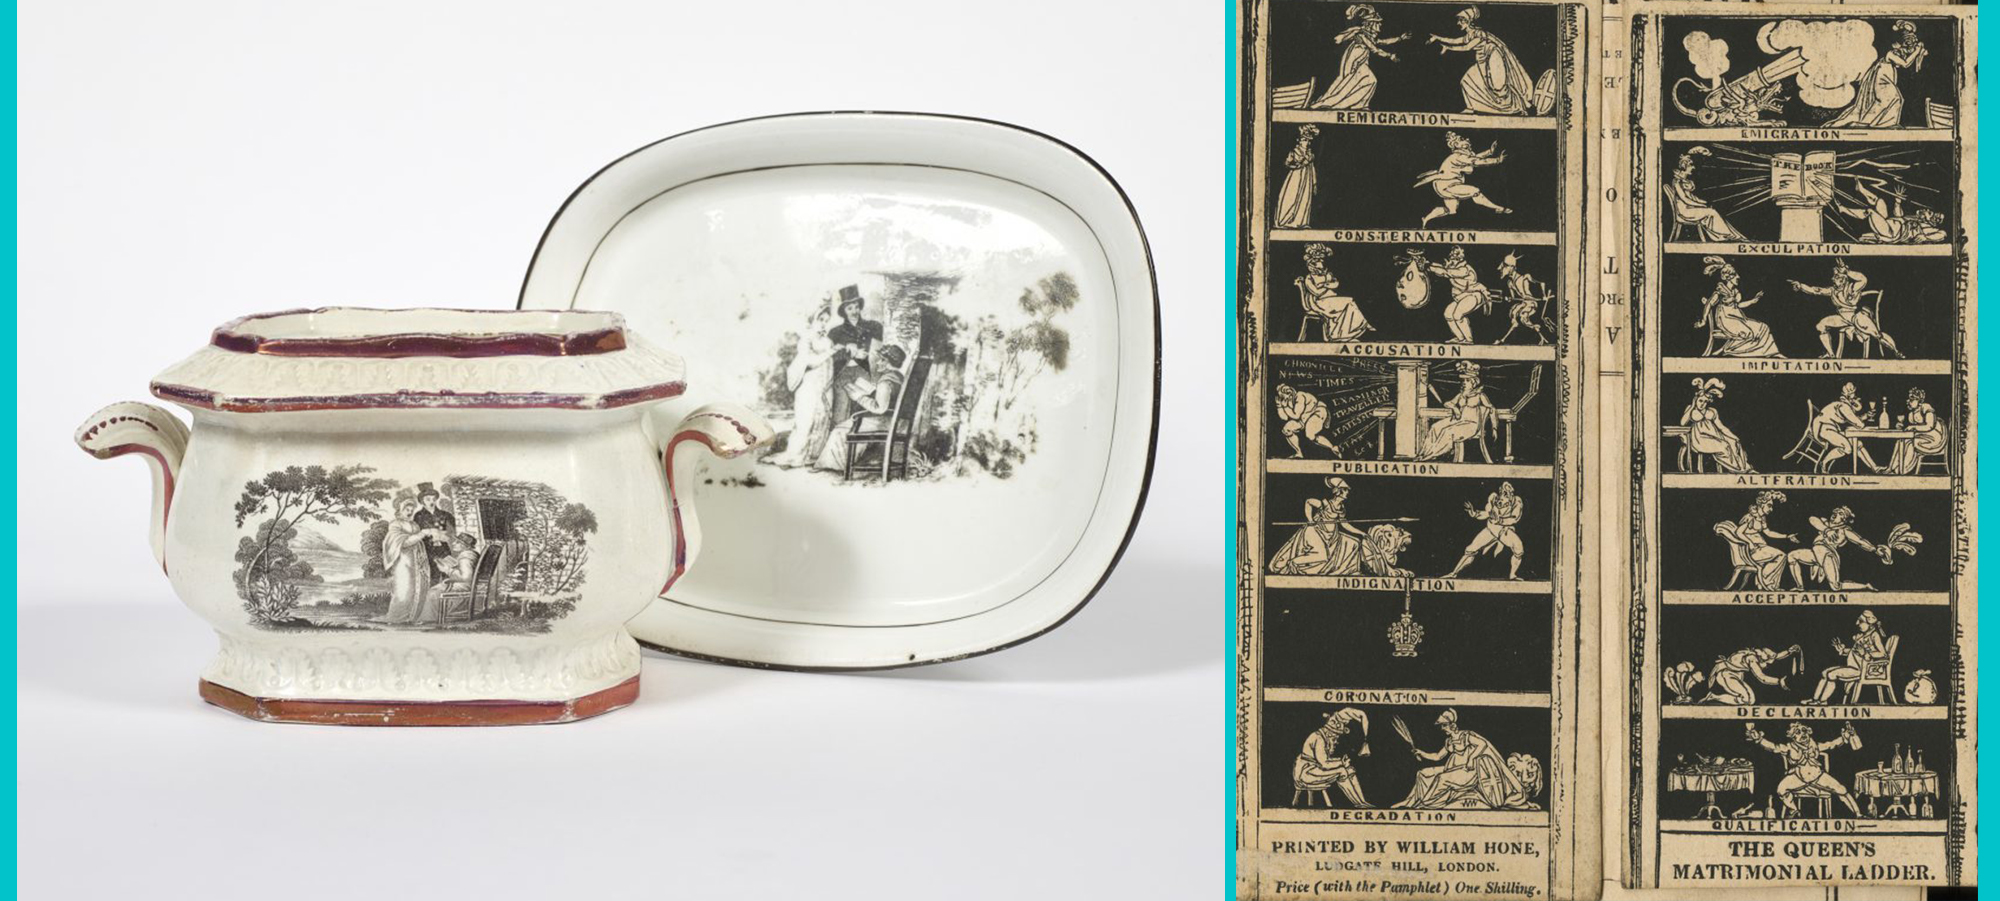 two pictures of objects from georgian times. left: china pottery plate and dish. right: Tapestry of figures and ladders